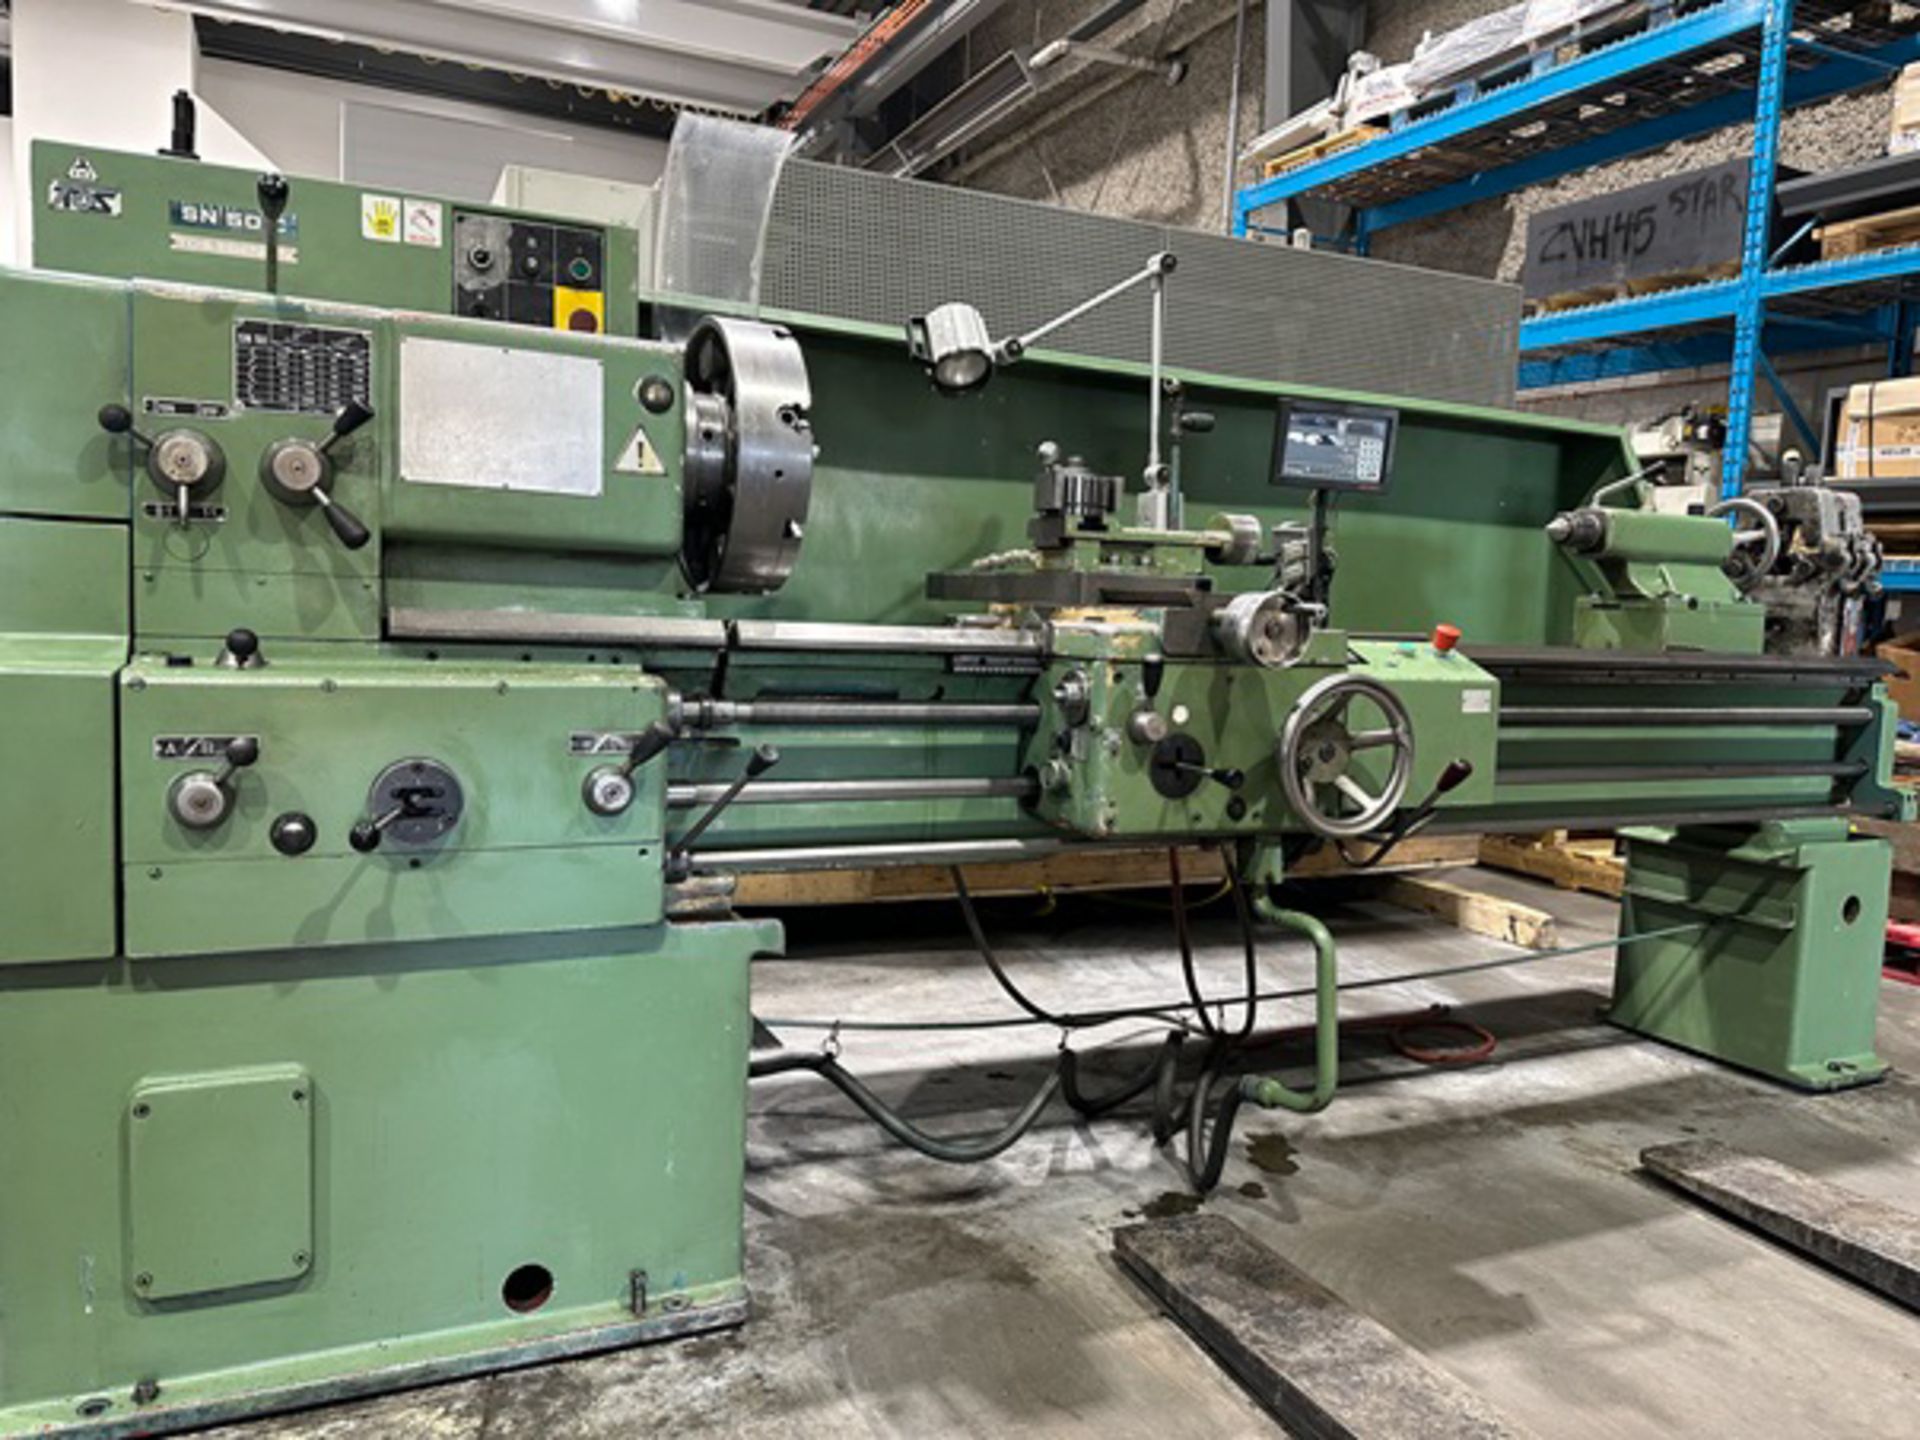 TOS SN50CX2000 GAP BED ENGINE LATHE WITH 20" SWING OVER BED, 27.5" SWING IN GAP, 80" DISTANCE - Image 8 of 16